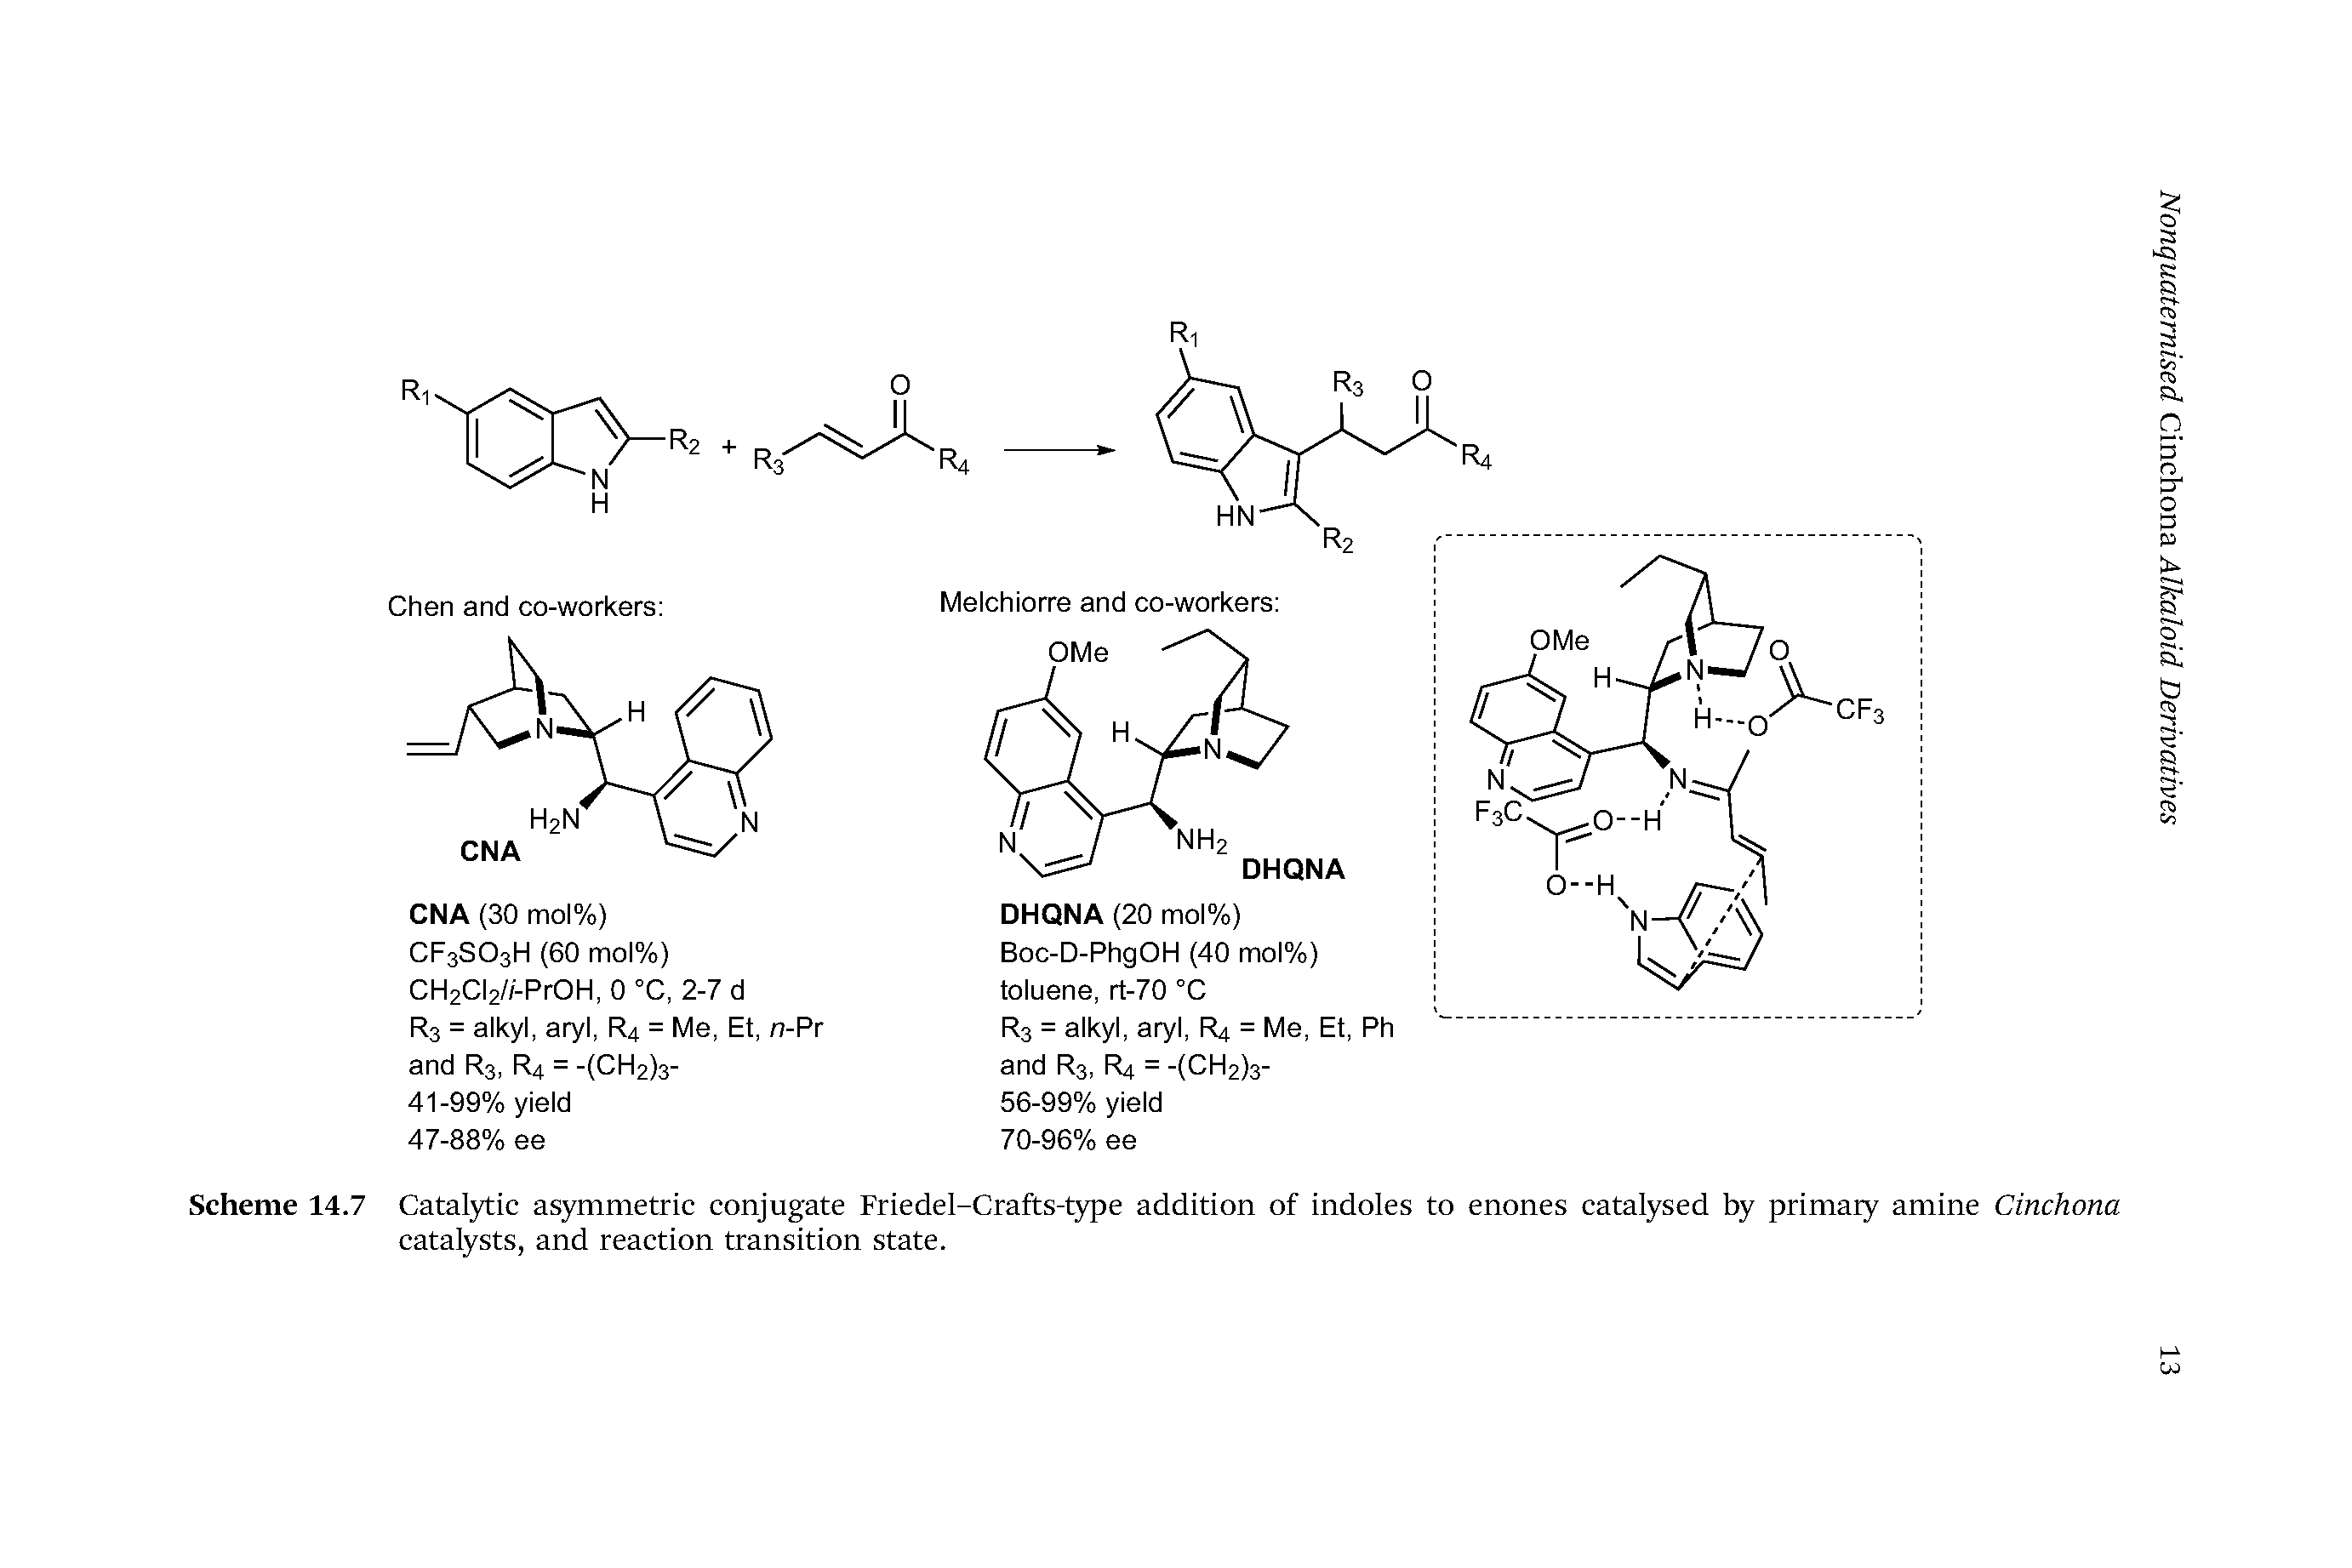 Scheme 14.7 Catalytic asymmetric conjugate Friedel-Crafts-type addition of indoles to enones catalysed by primaiy amine Cinchona catalysts, and reaction transition state.